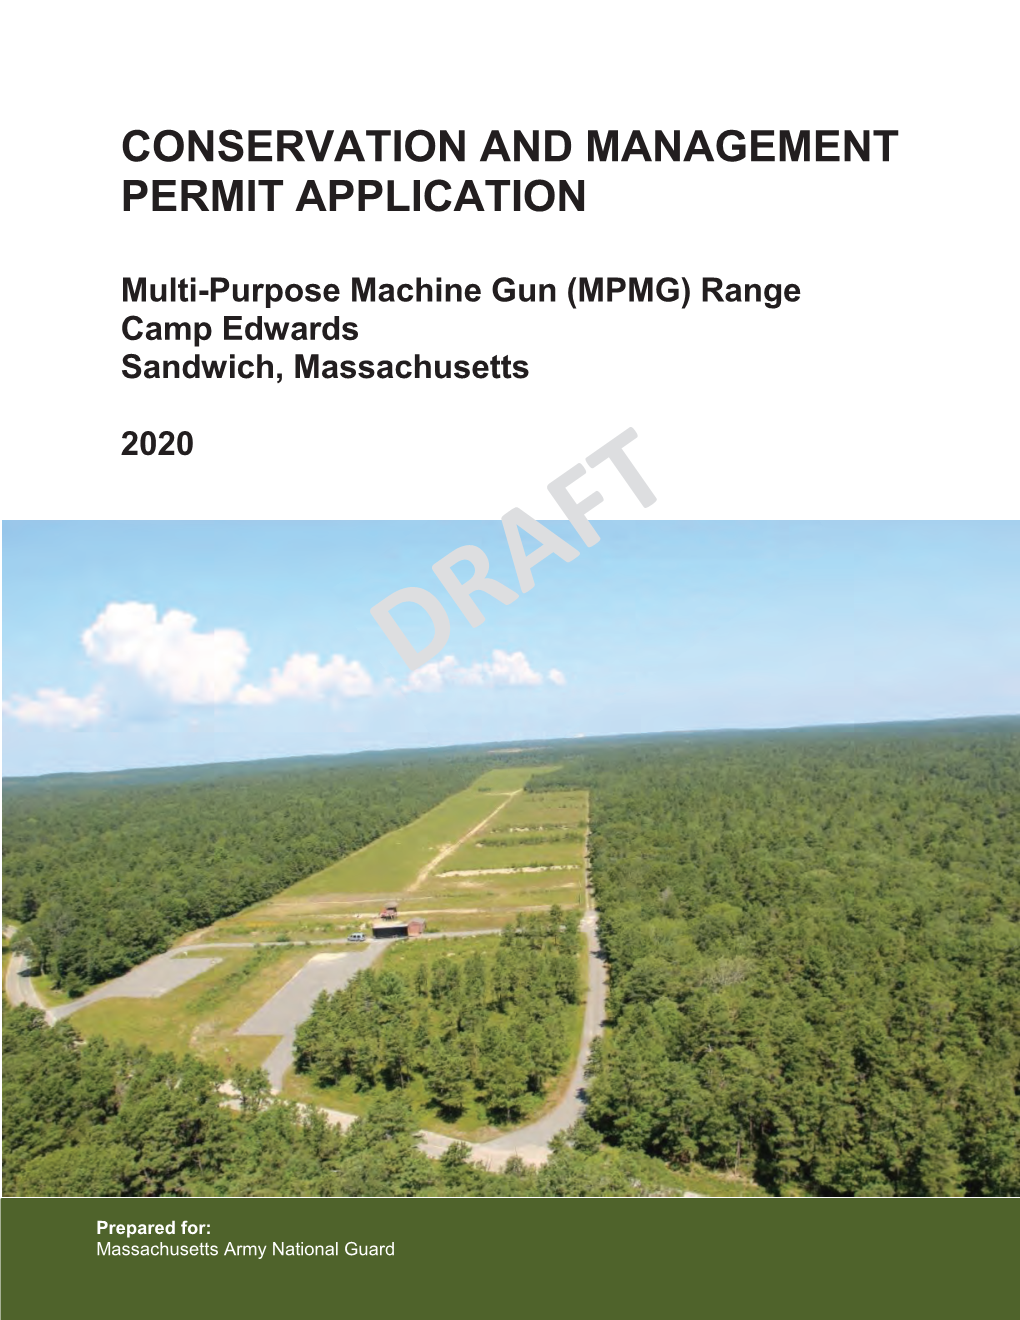 Conservation and Management Permit Application